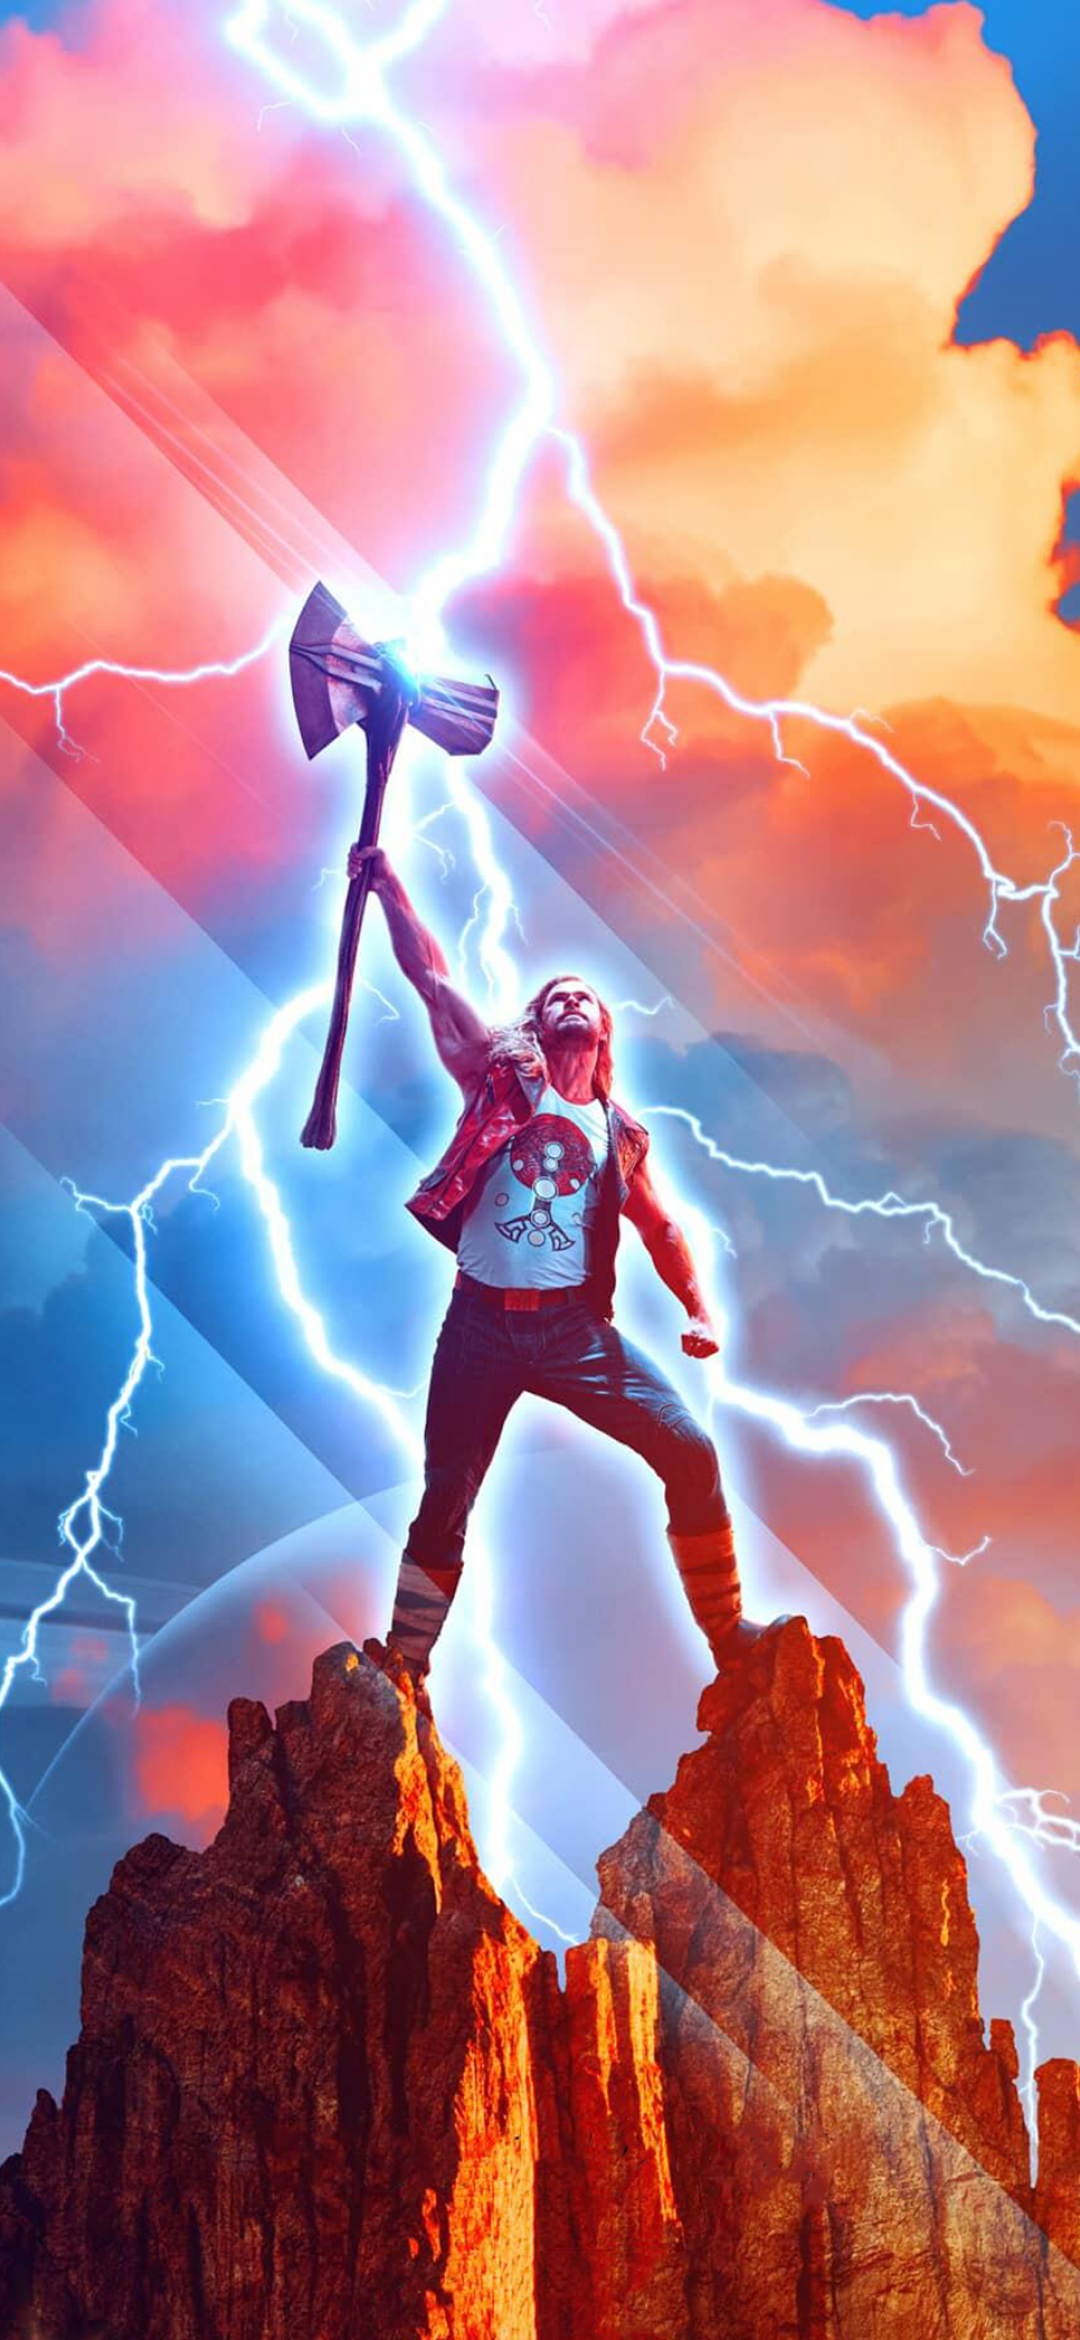 1080x2340 Thor Love And Thunder Poster 1080x2340 Resolution Wallpaper Hd Movies 4k Wallpapers 2985